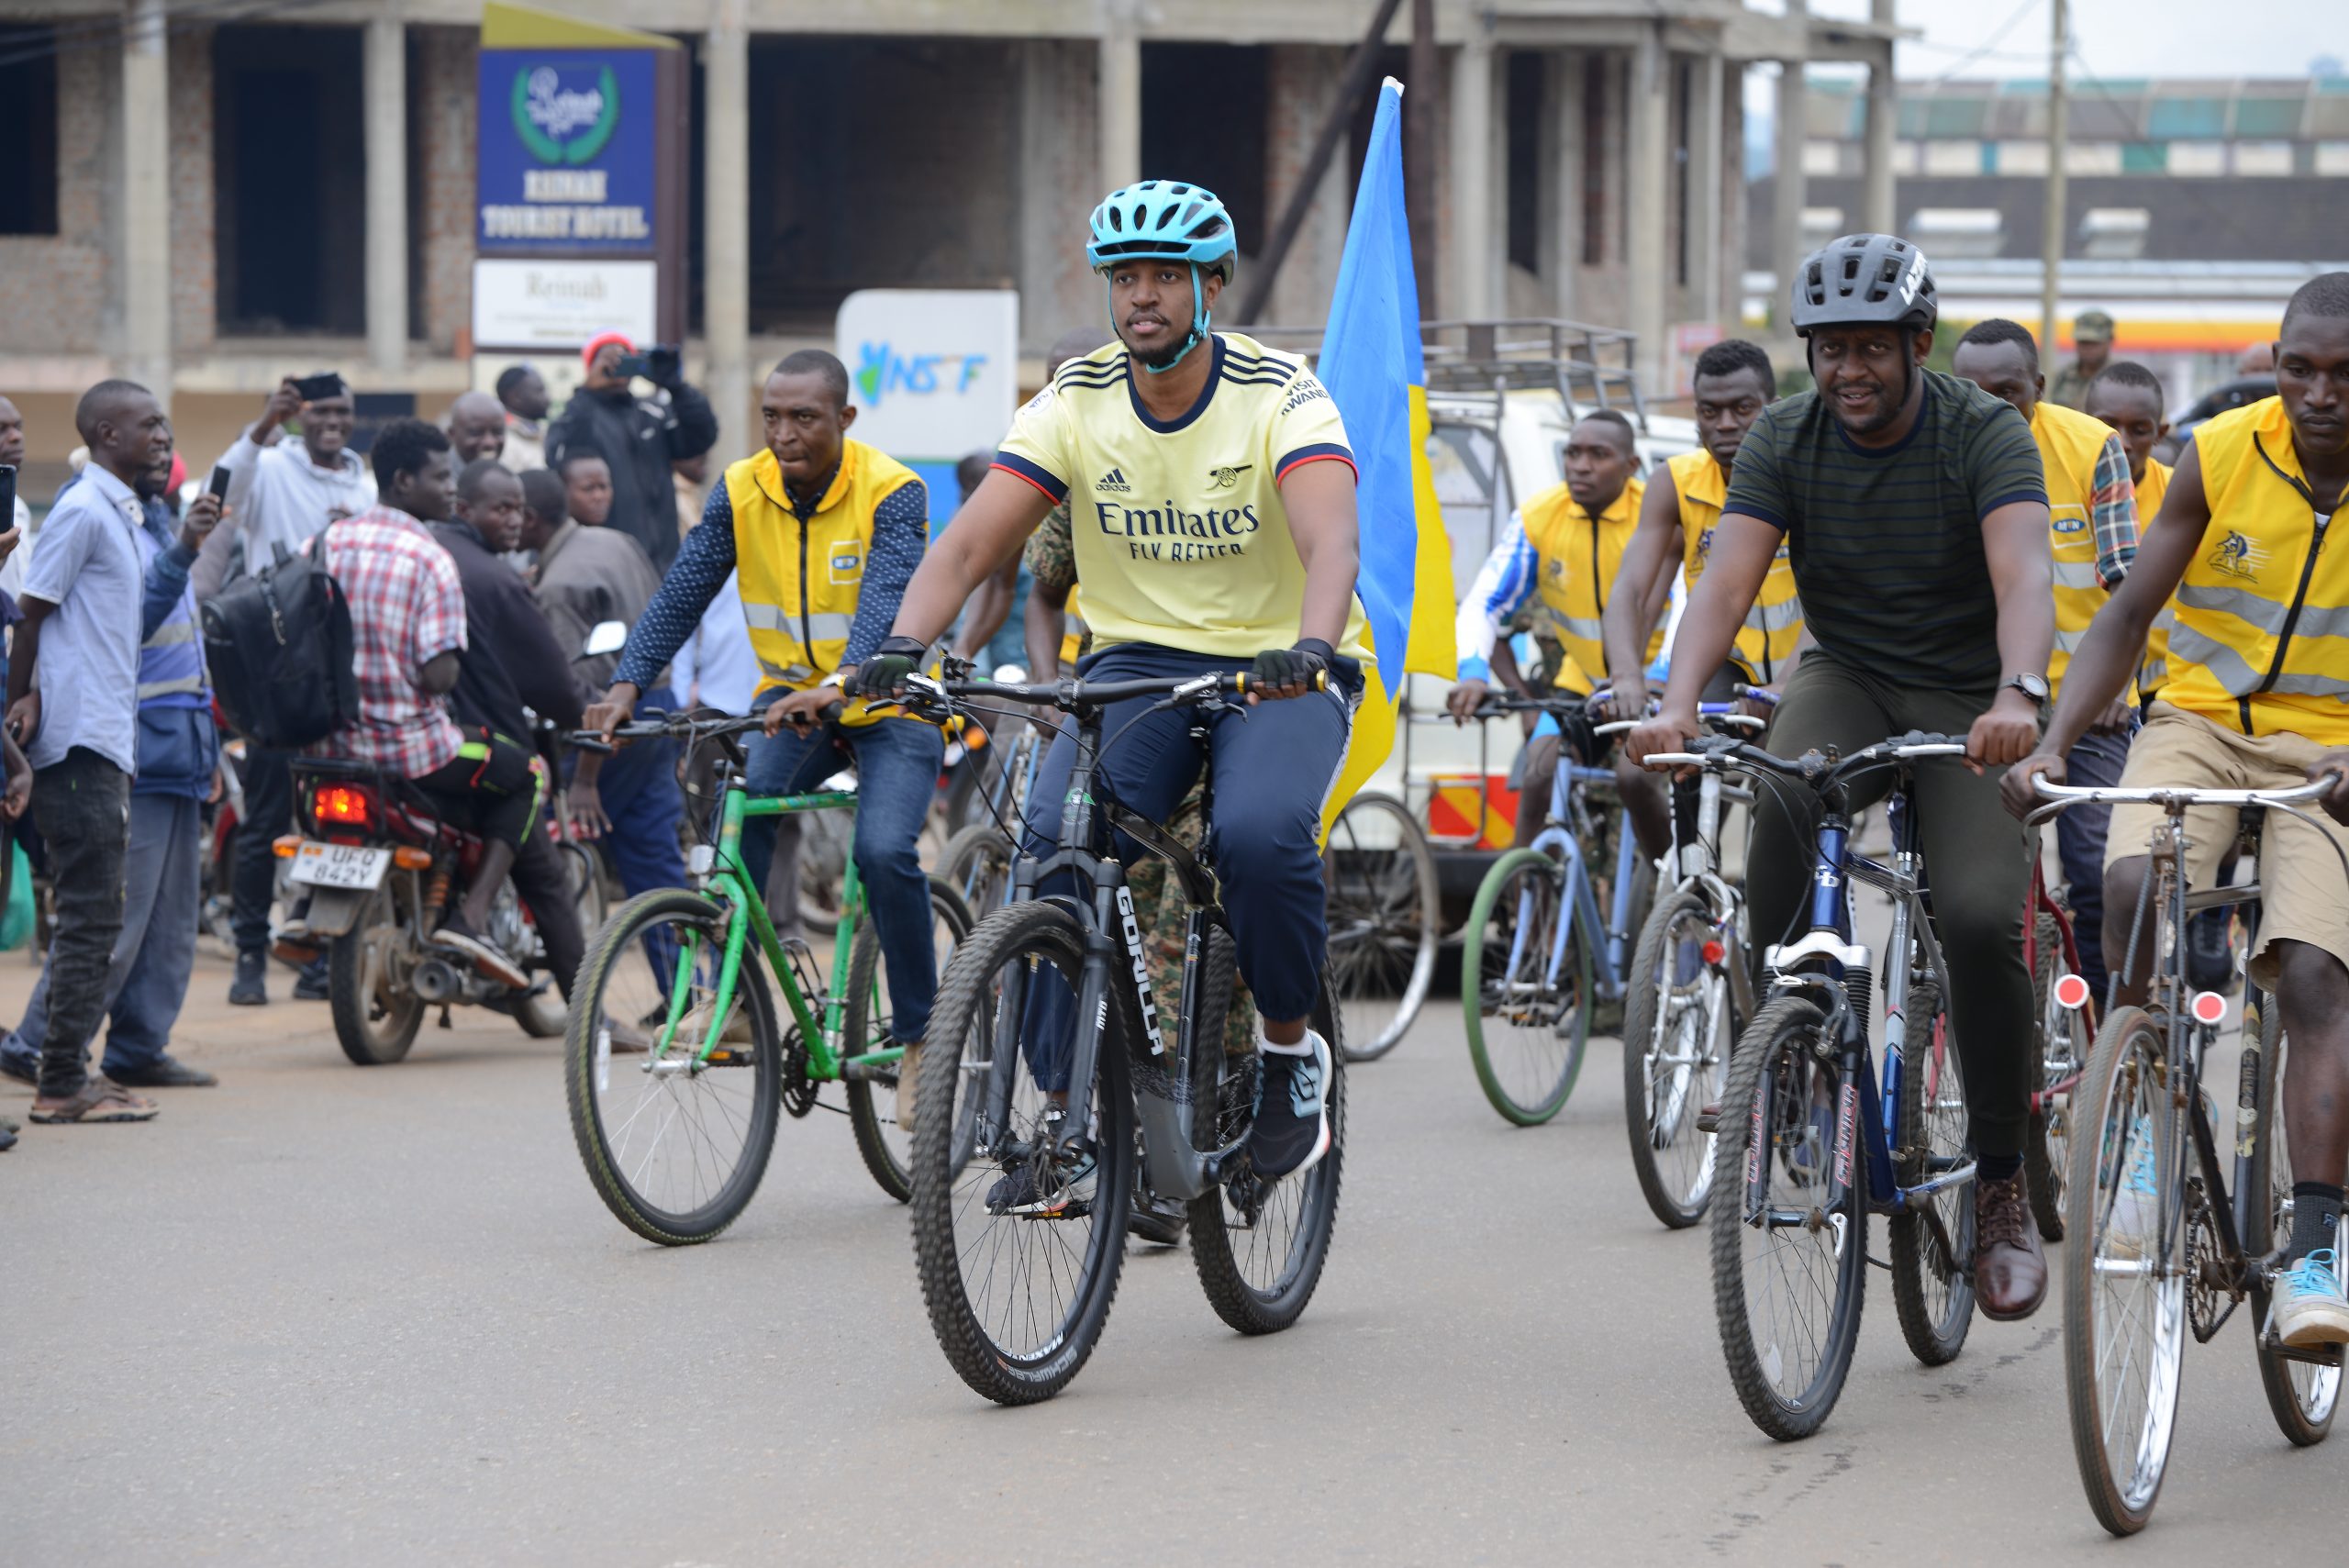 His Royal Highness King Oyo in blue helmet rode a section of the sport bike race category in Fort Portal town scaled